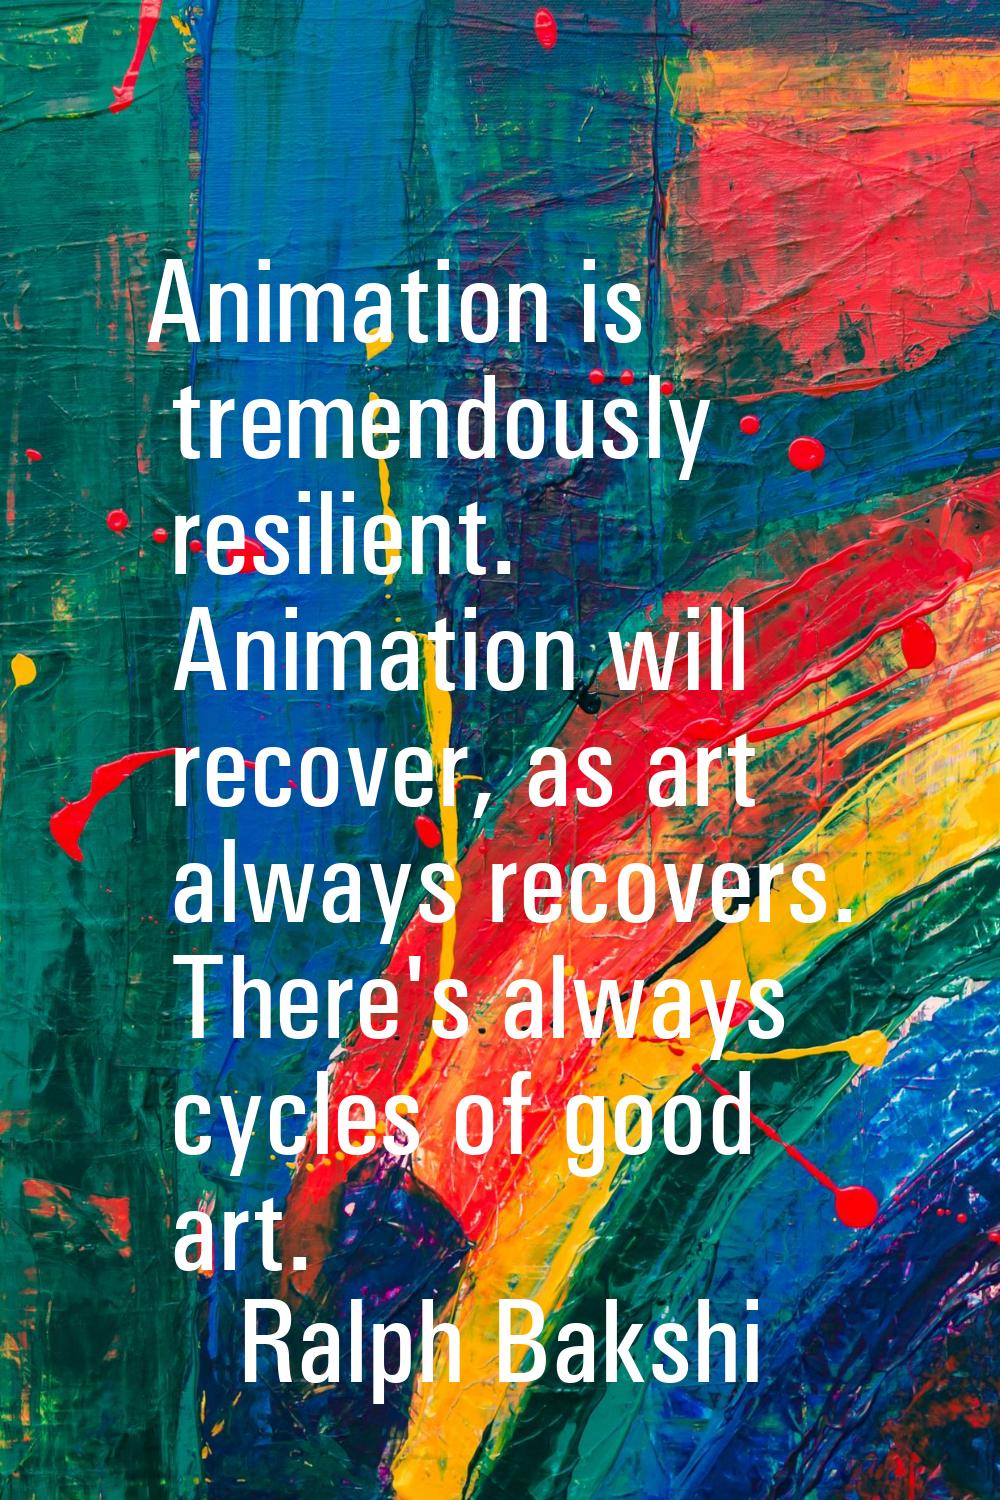 Animation is tremendously resilient. Animation will recover, as art always recovers. There's always